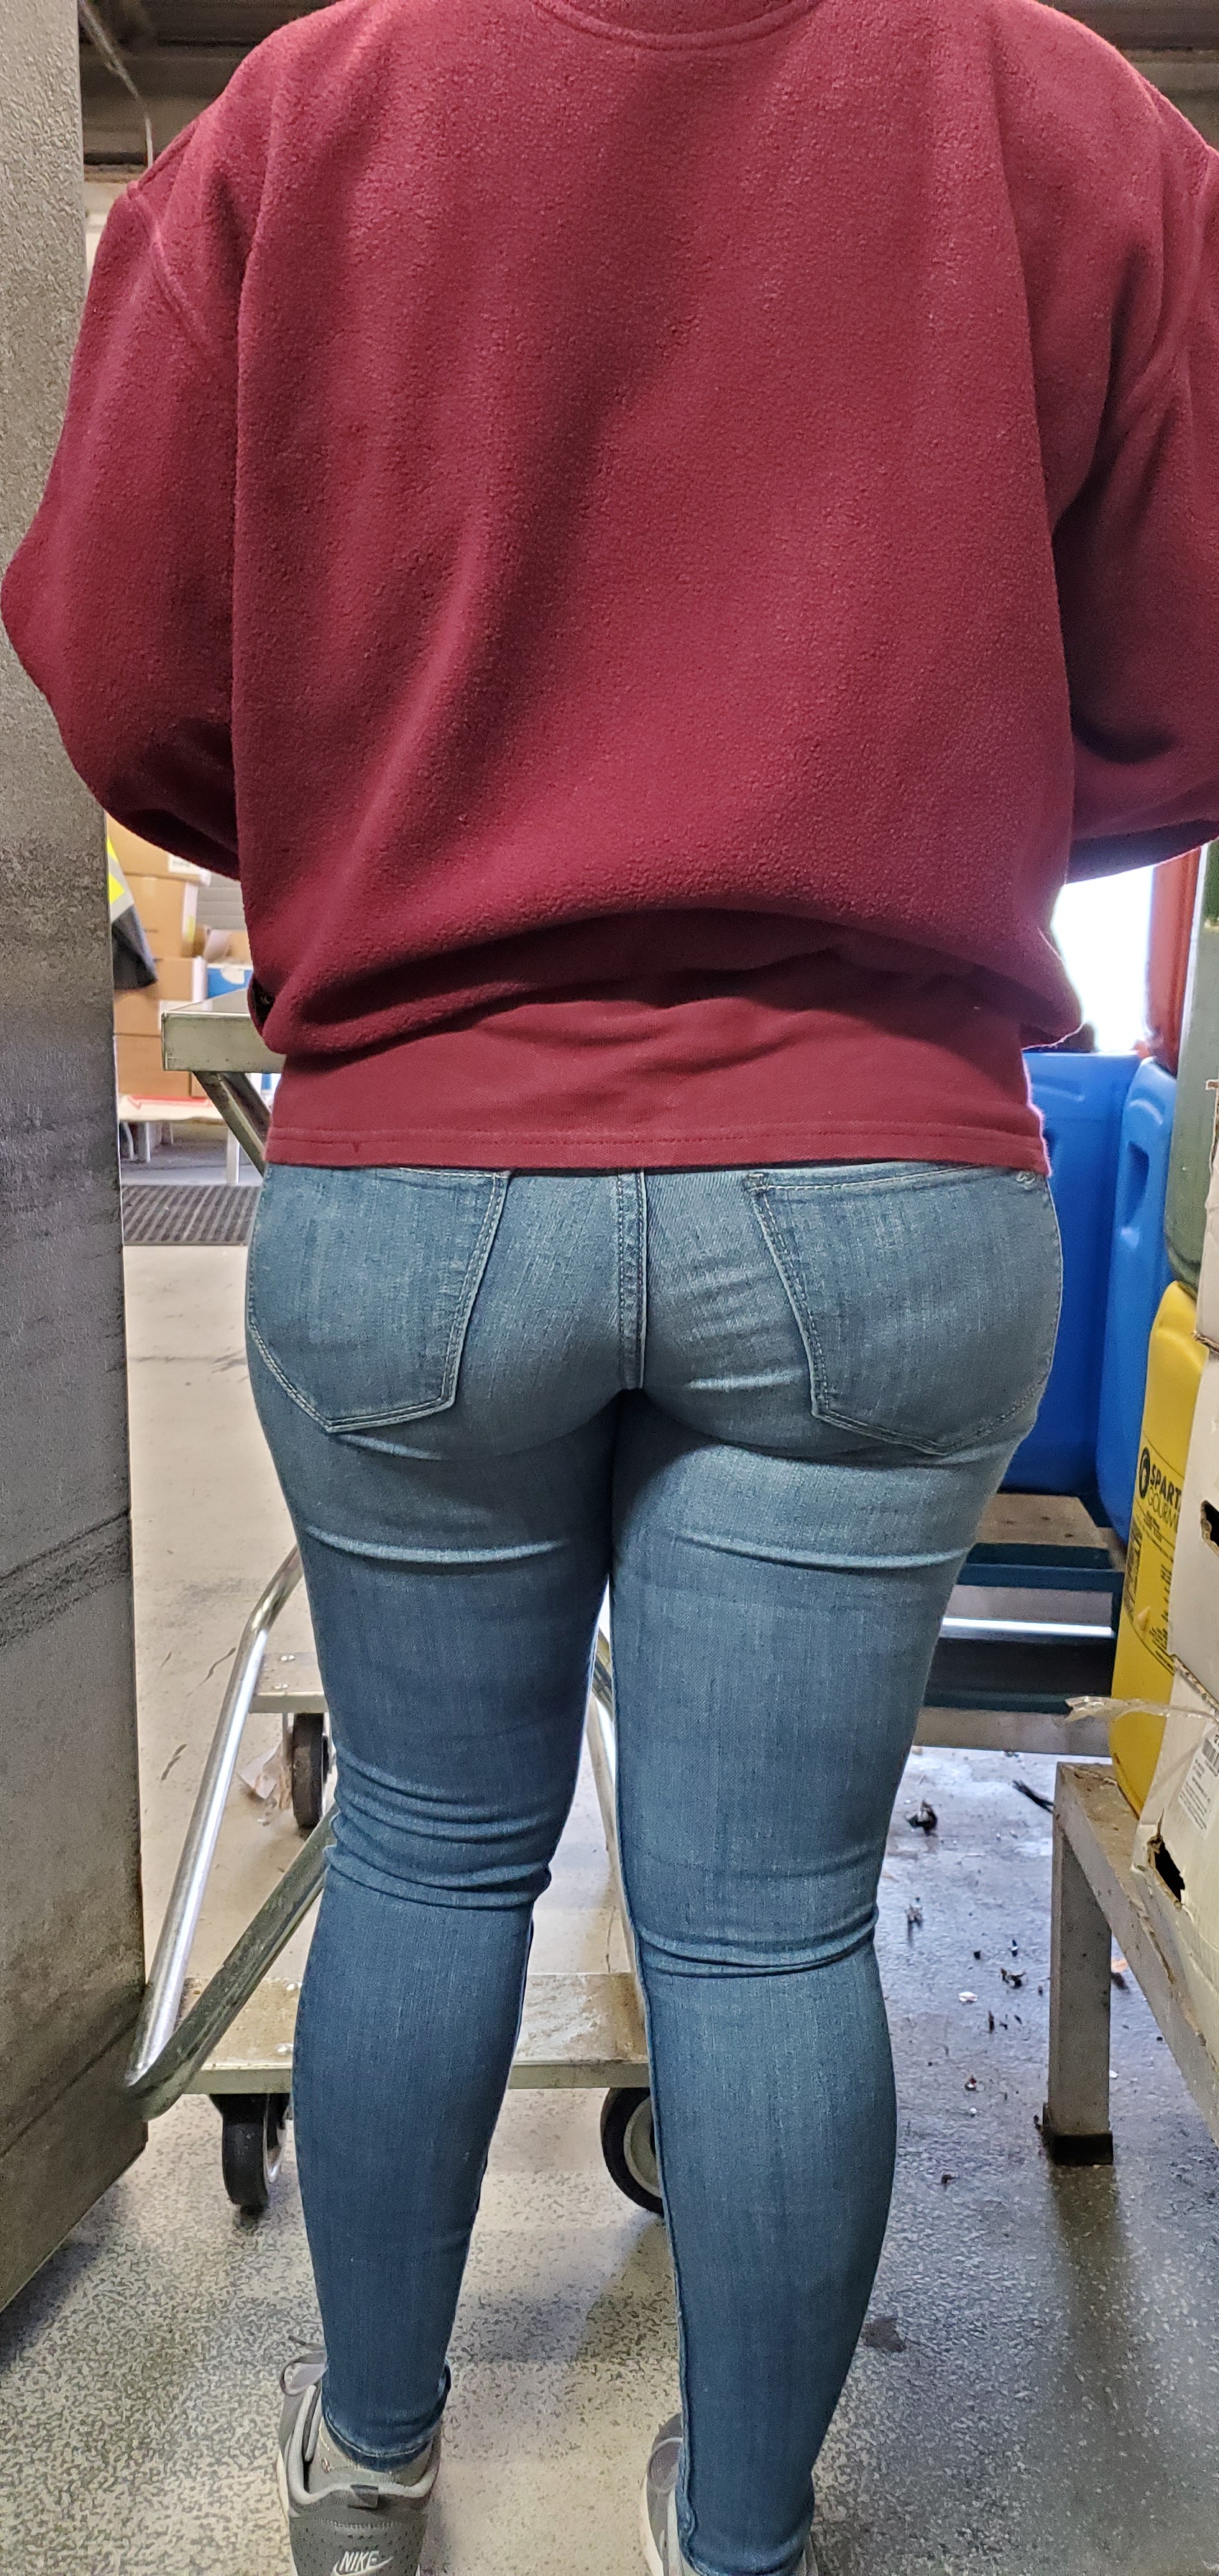 NICE PHAT ASS IN JEANS